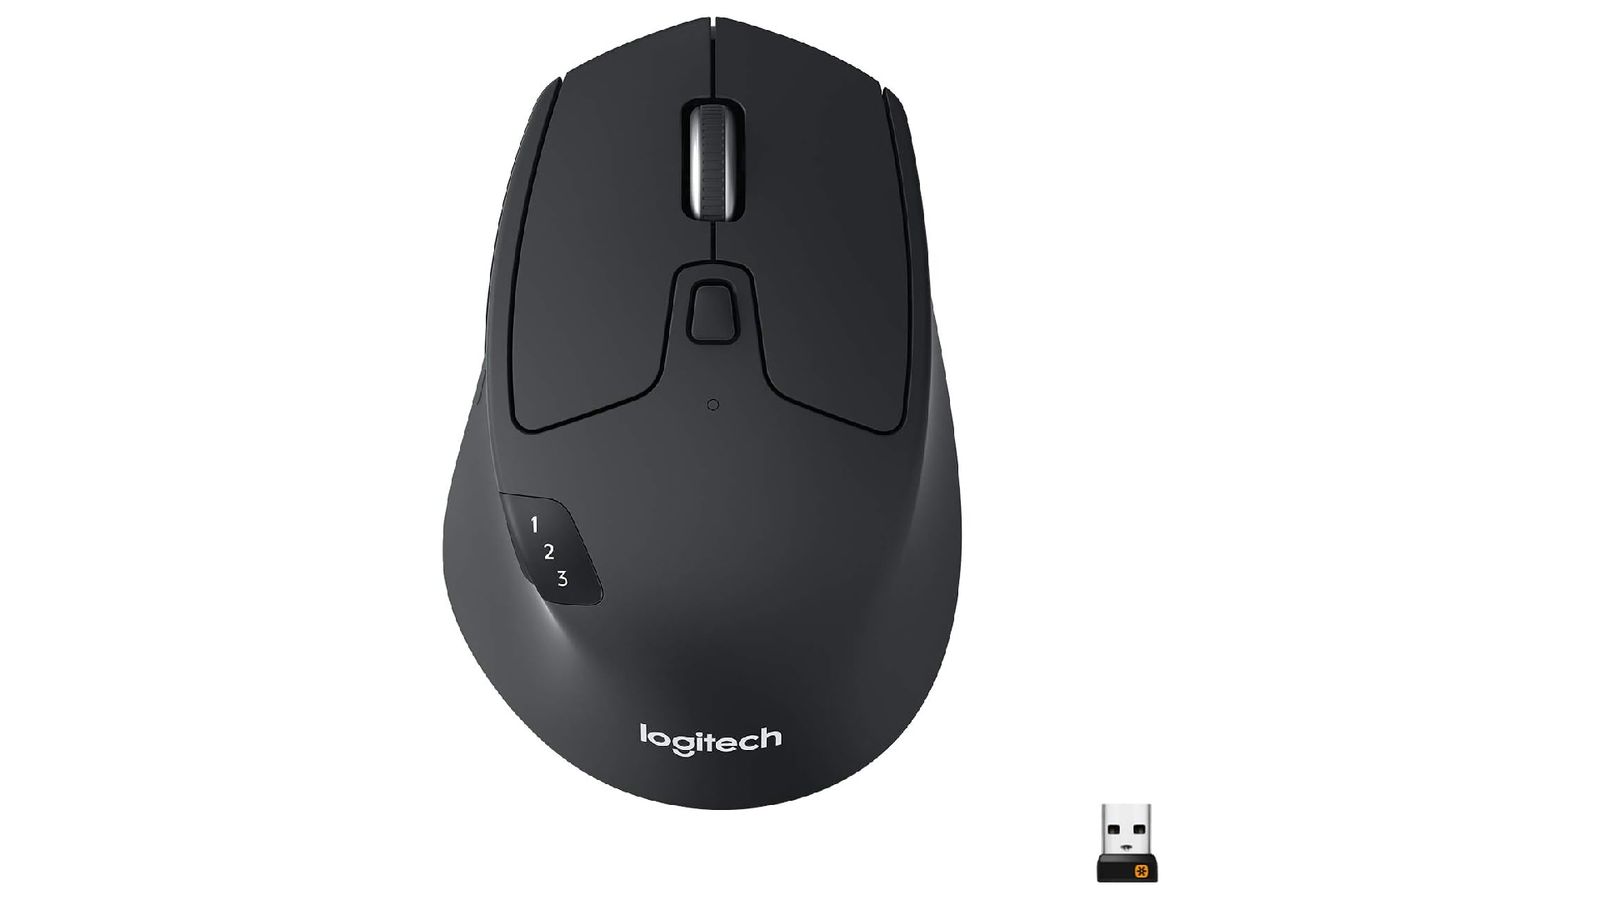 Logitech M720 Triathlon product image of a black mouse with an accompanying USB stick.